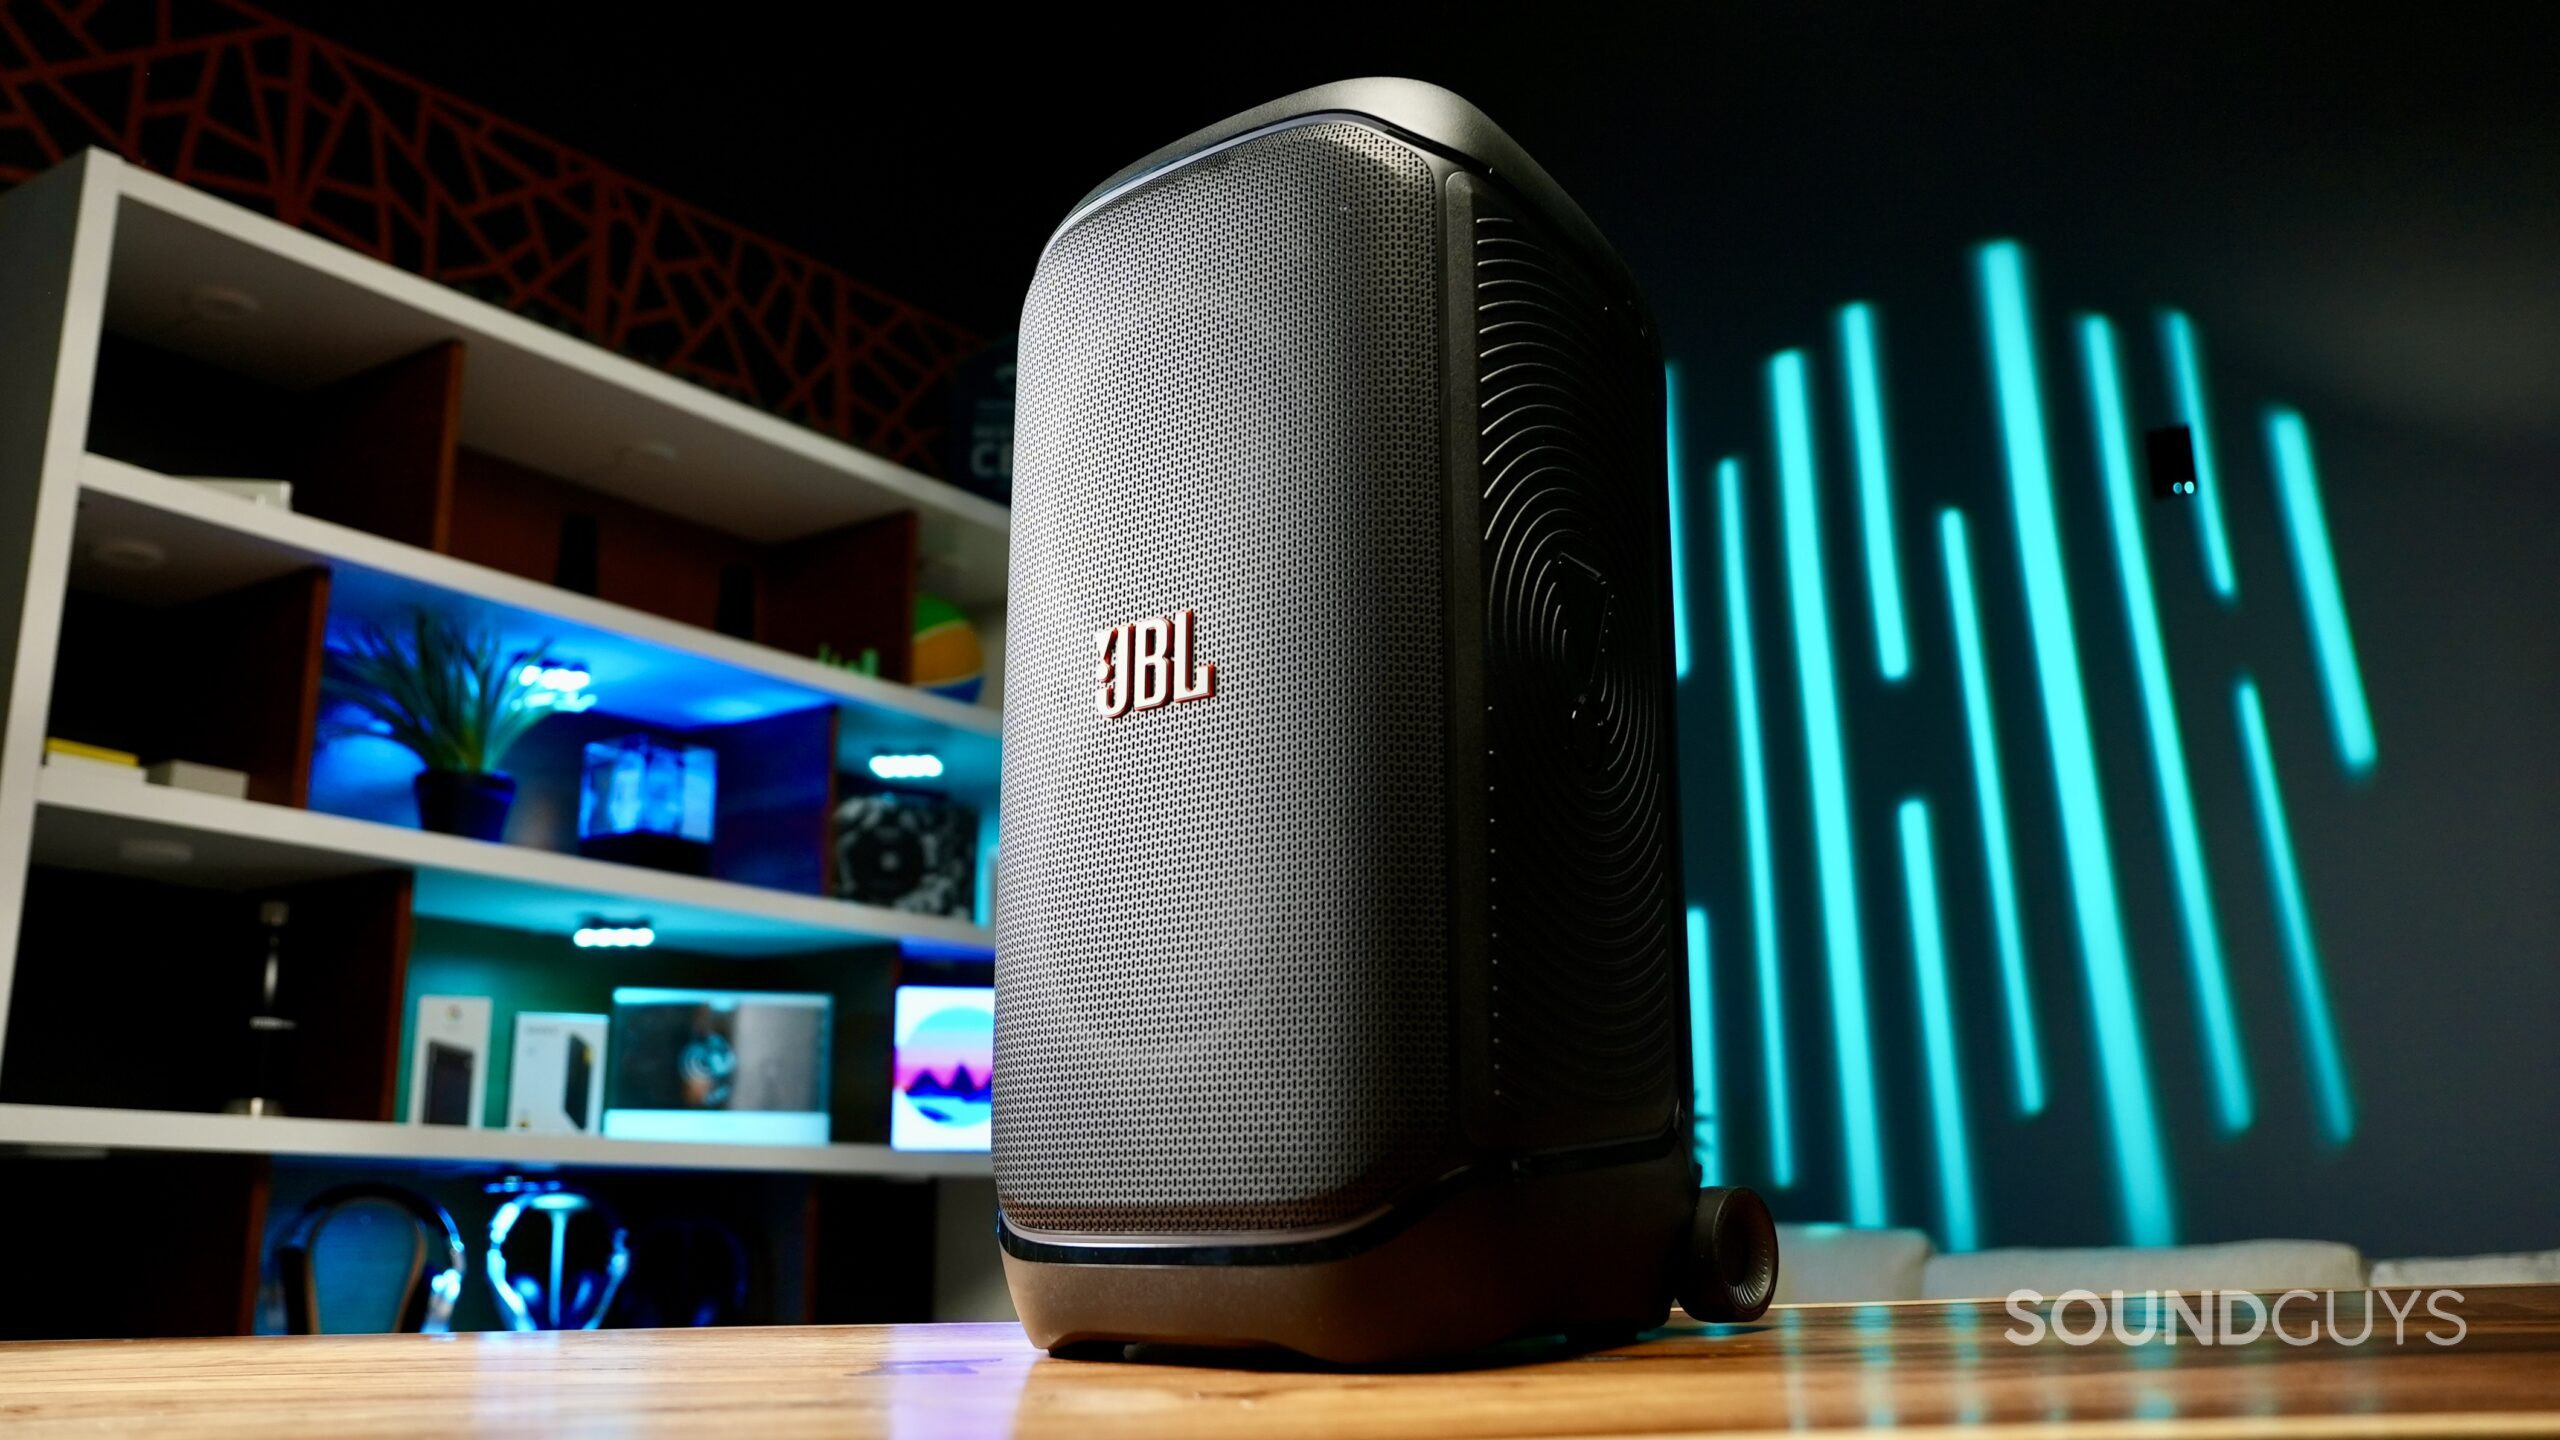 The JBL PartyBox 320 on a wooden table